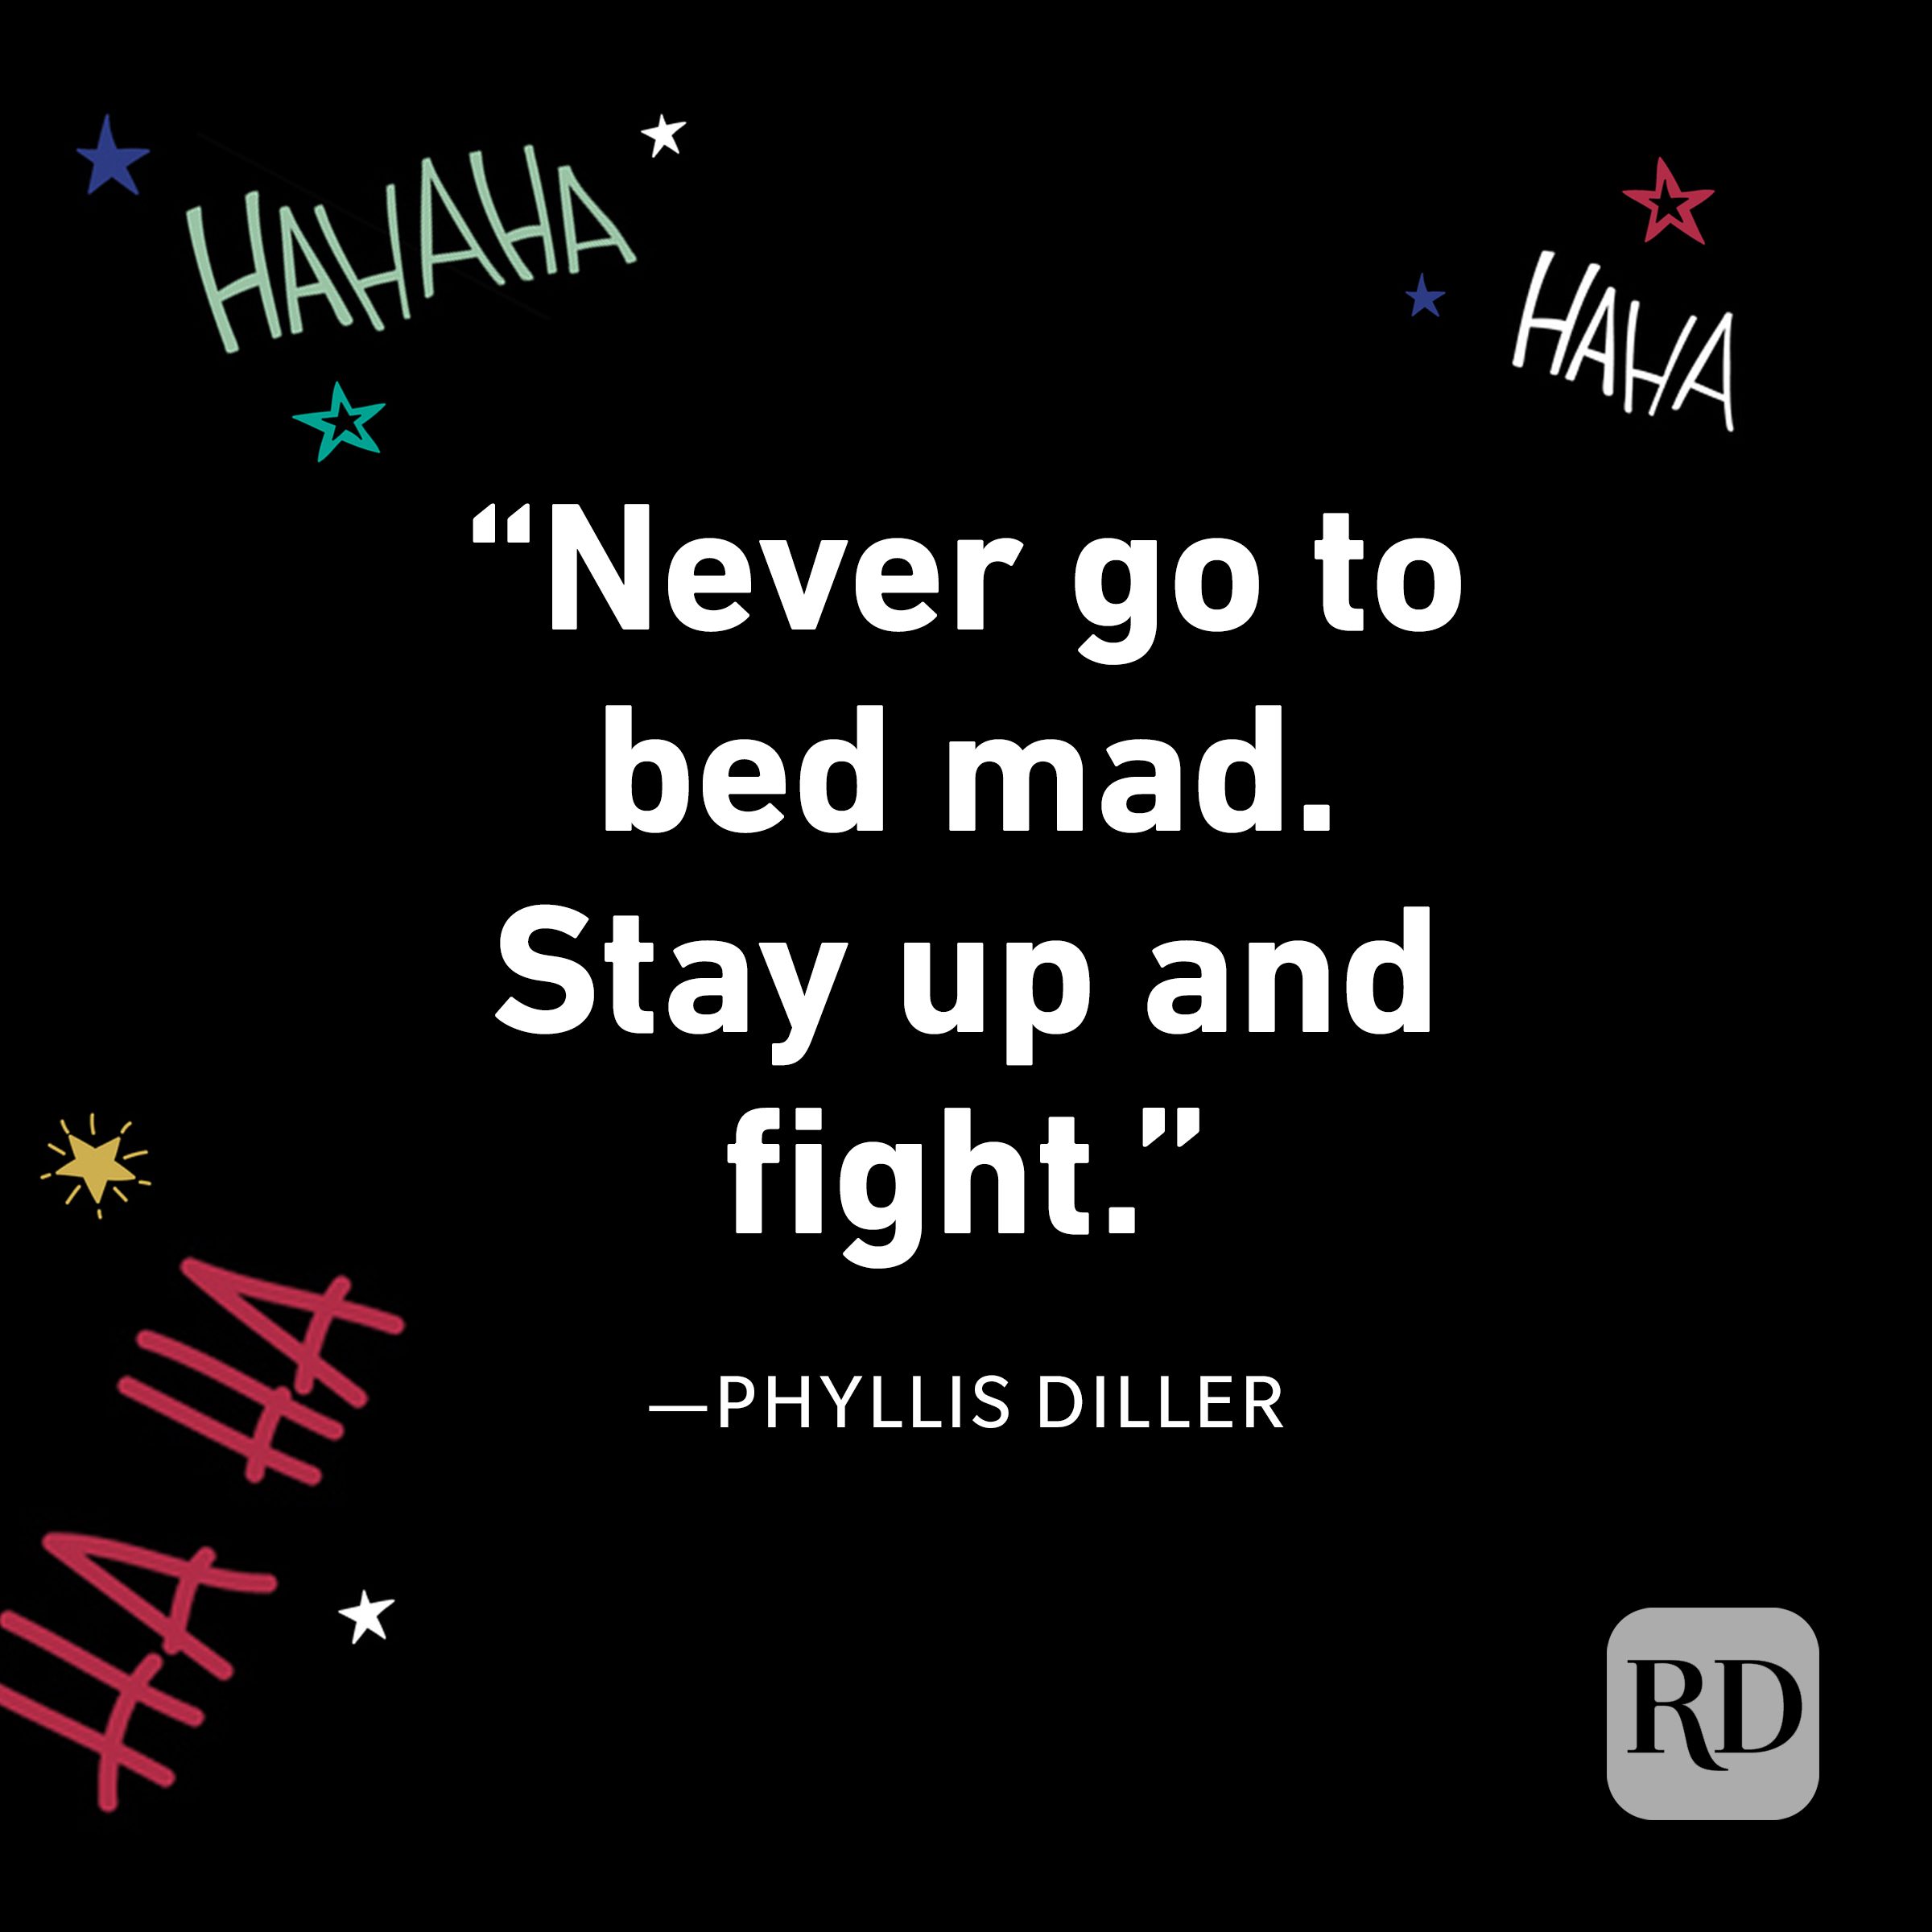 Phyllis Diller 100 Funniest Quotes